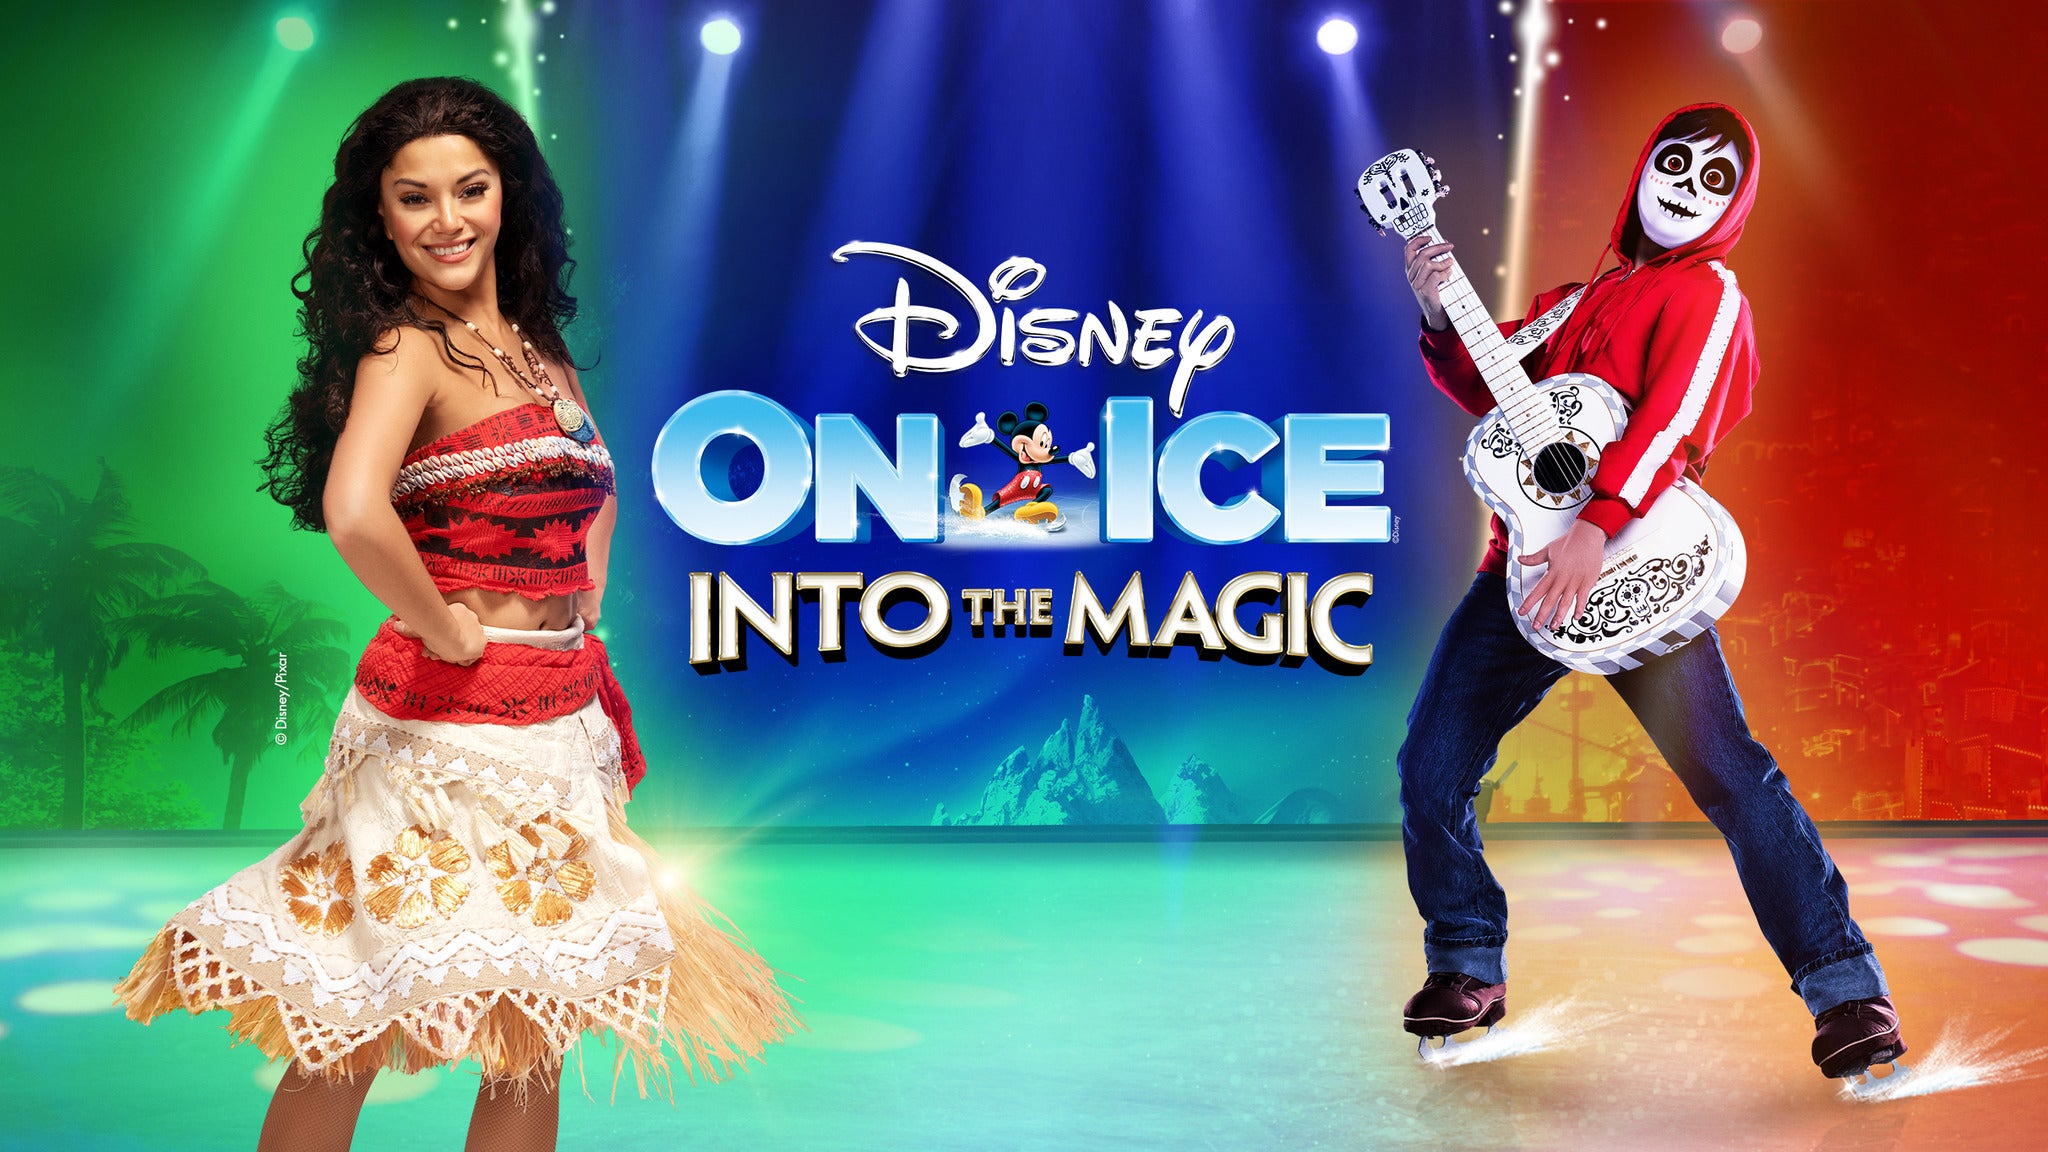 Disney On Ice presents Into the Magic presale passcode for early tickets in Manchester